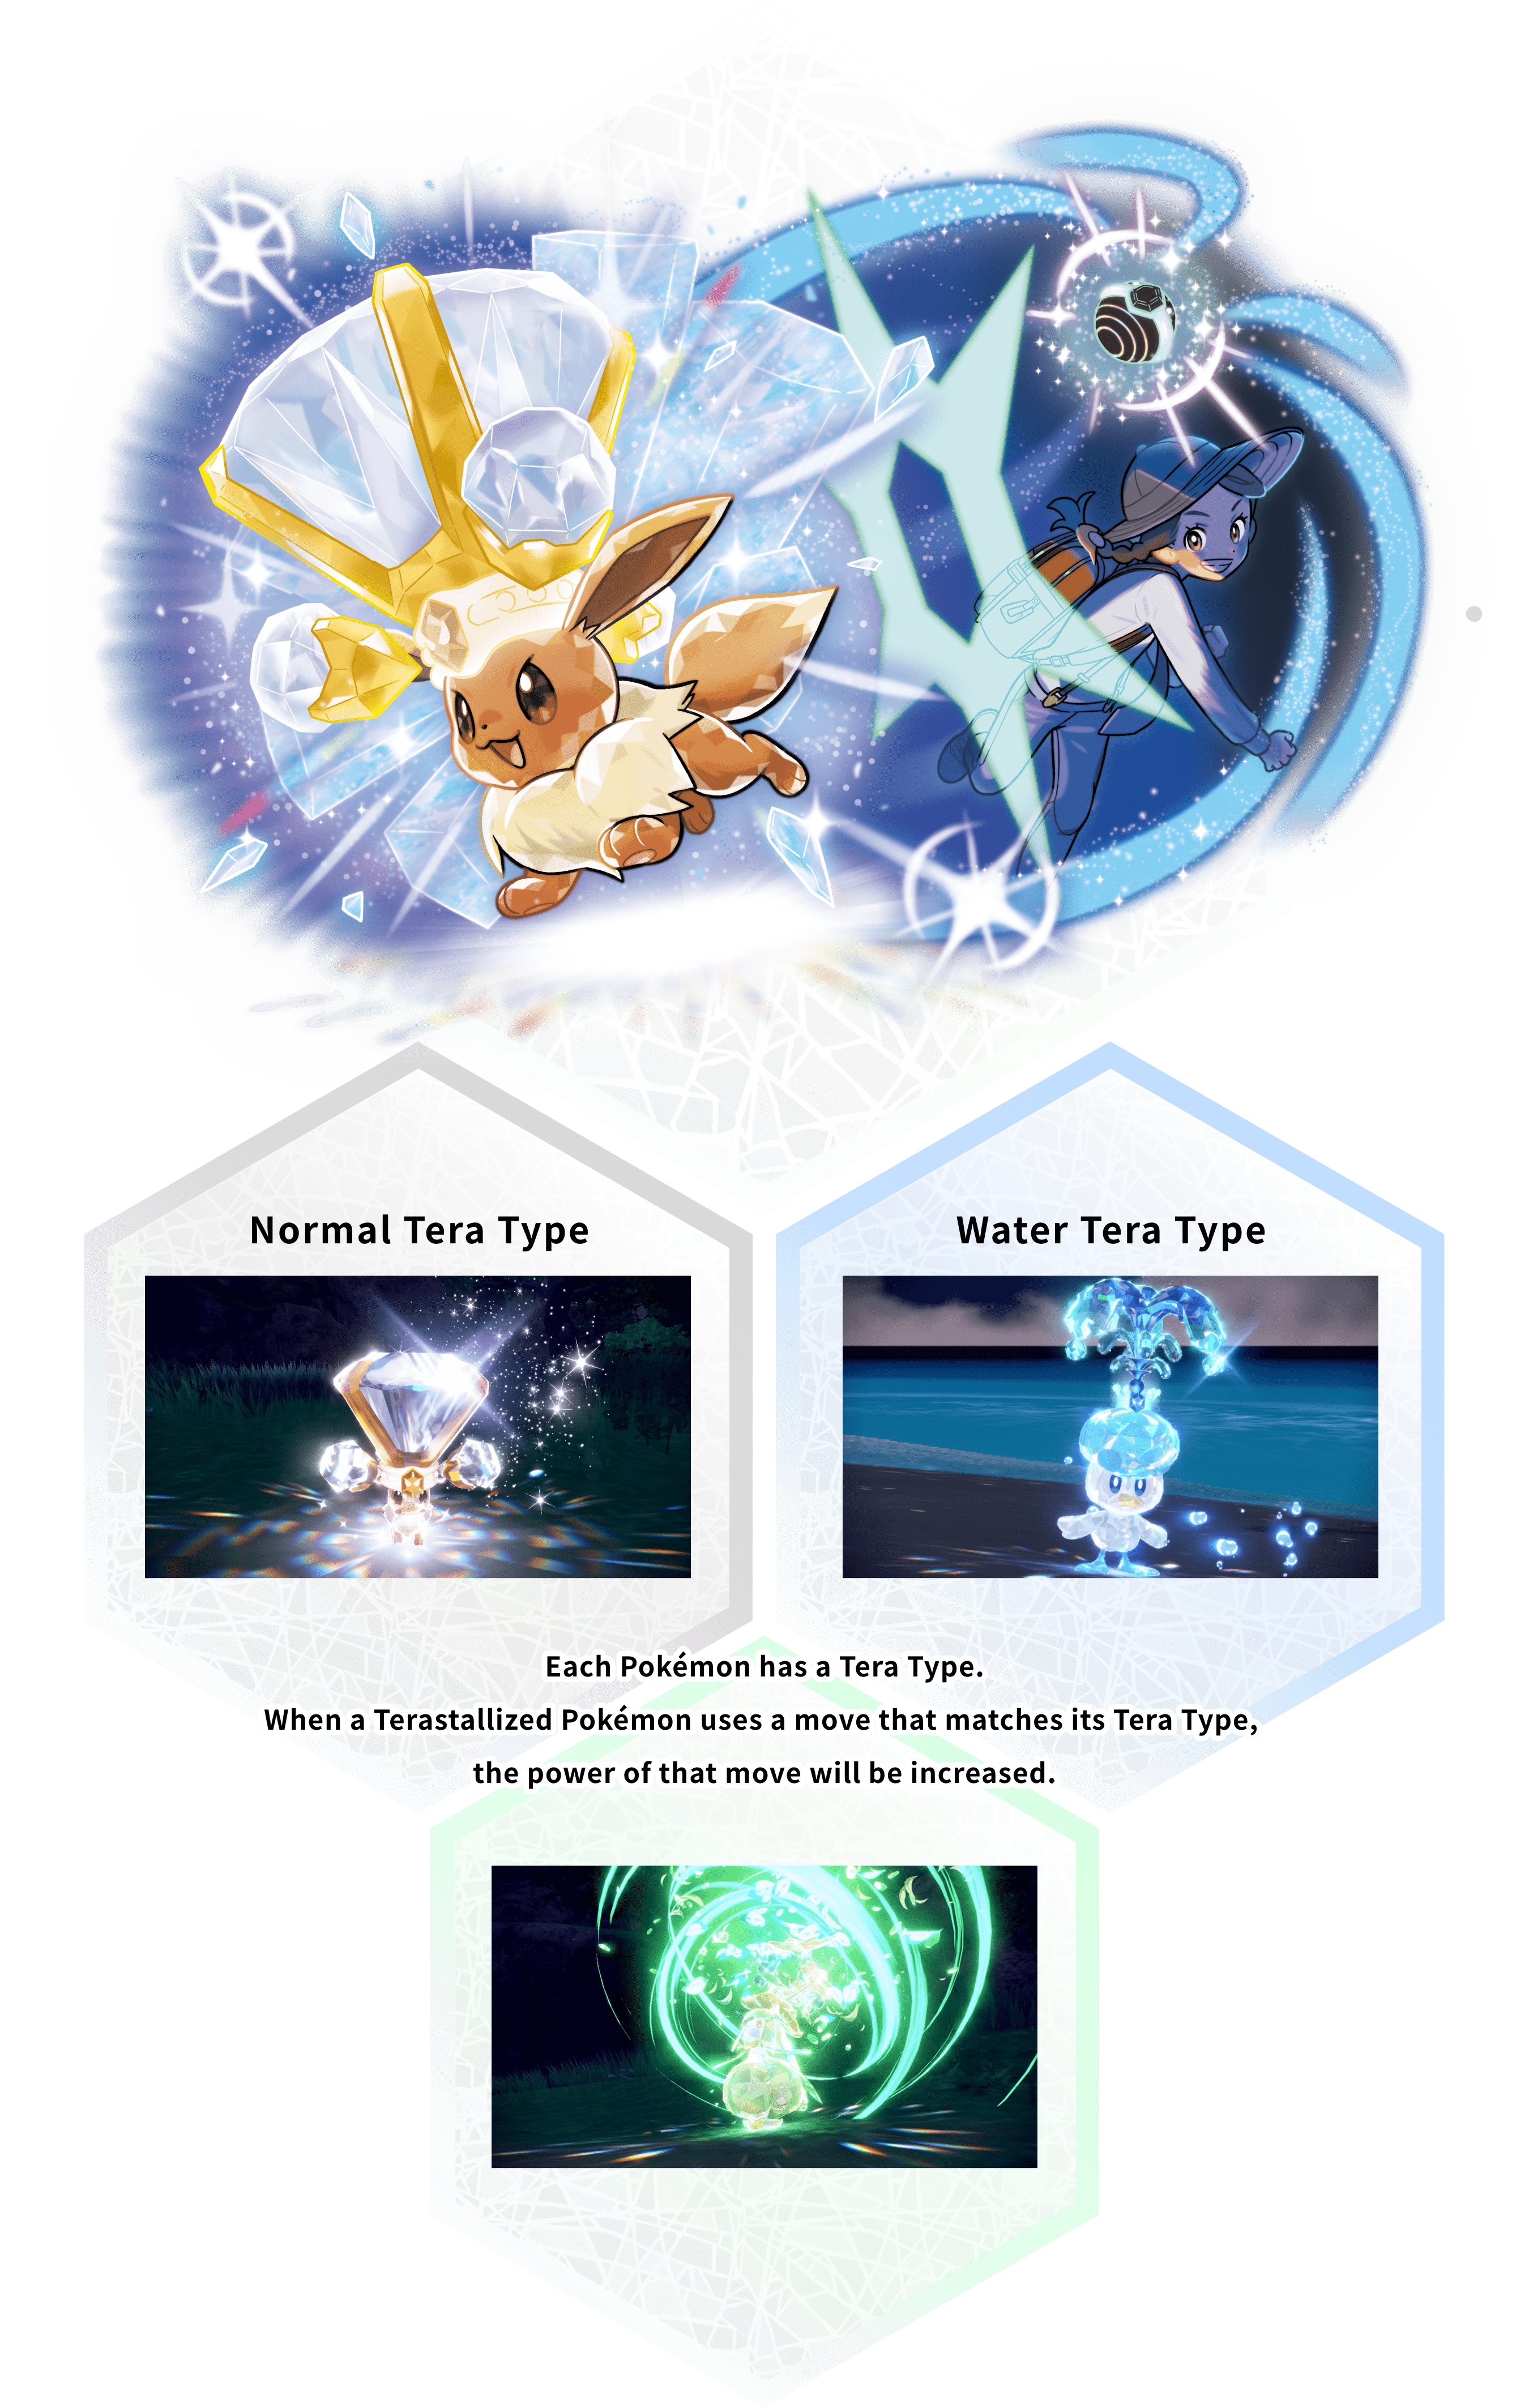 Each Pokémon has a Tera Type. A Pokémon’s Tera Type is inactive until the Pokémon Terastallizes, <br>at which time the Pokémon’s type will change to its Tera Type. <br>Some Eevee will have a Normal Tera Type, but some other Eevee have a Water Tera Type. / When a Terastallized Pokémon uses a move that matches <br>its Tera Type and at least one of its original types, <br>the boost to that move’s power will be even greater!